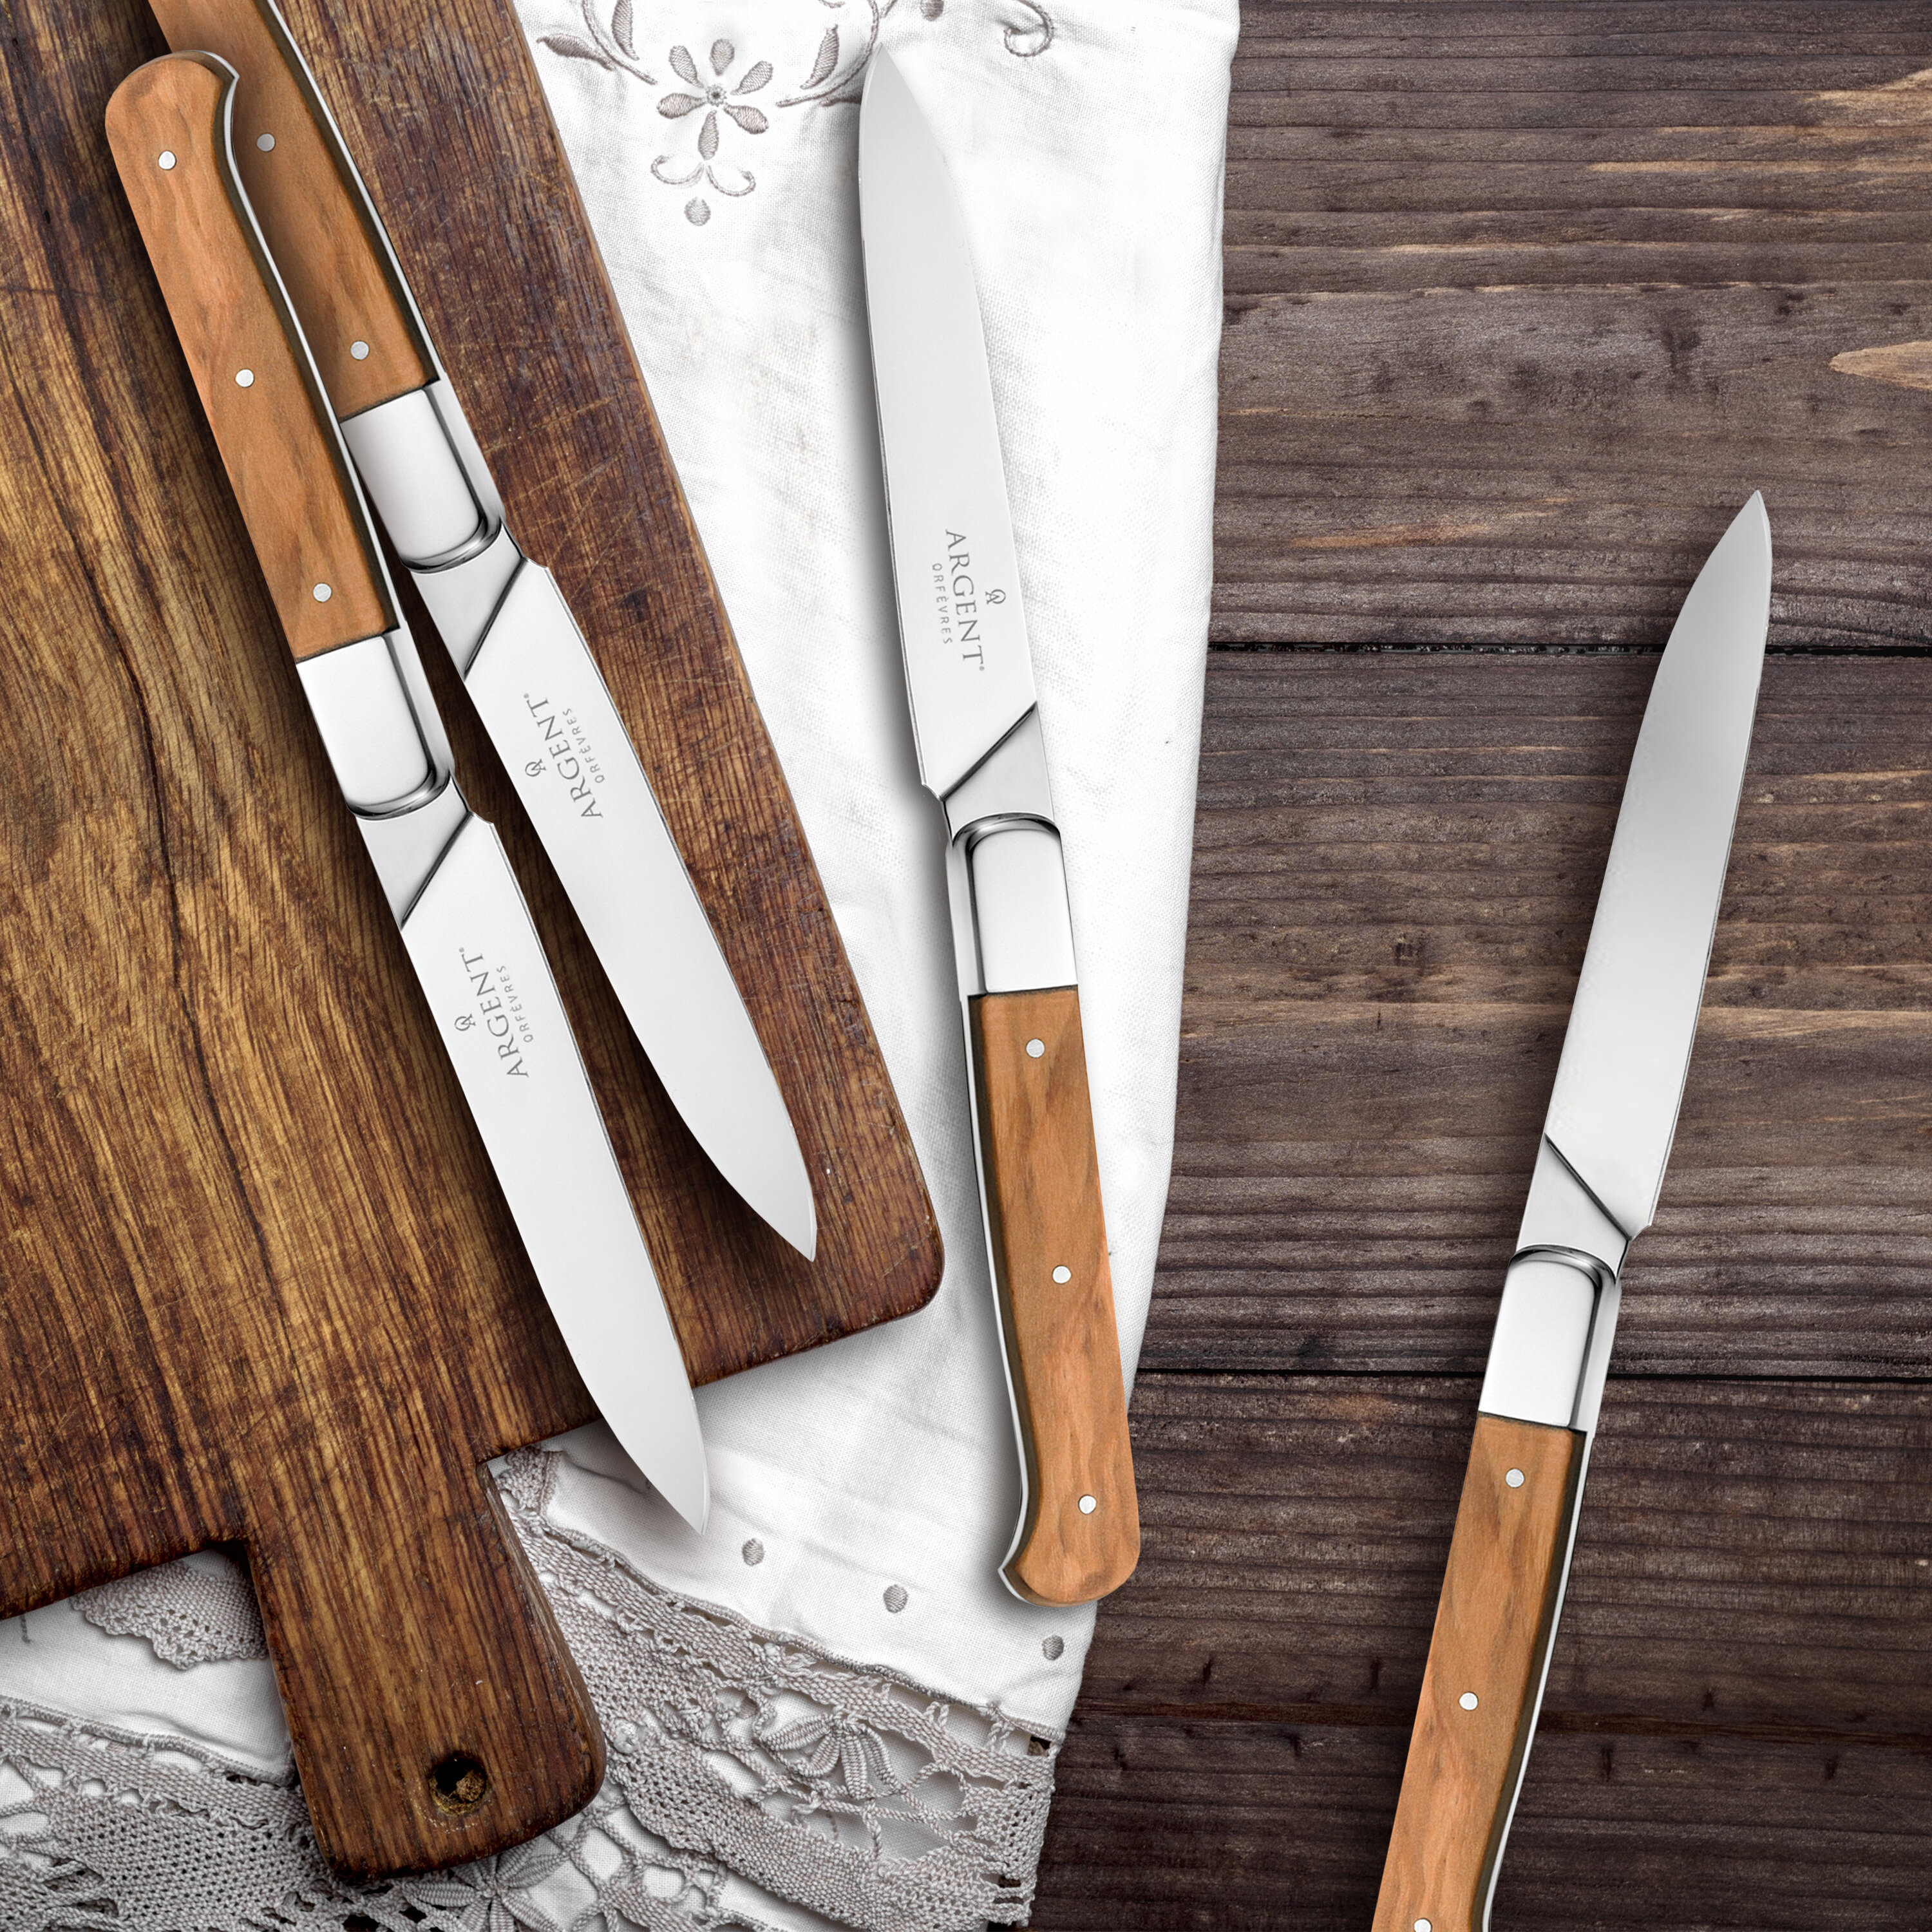 4 Pc 5 in Forged Steak Knife Set